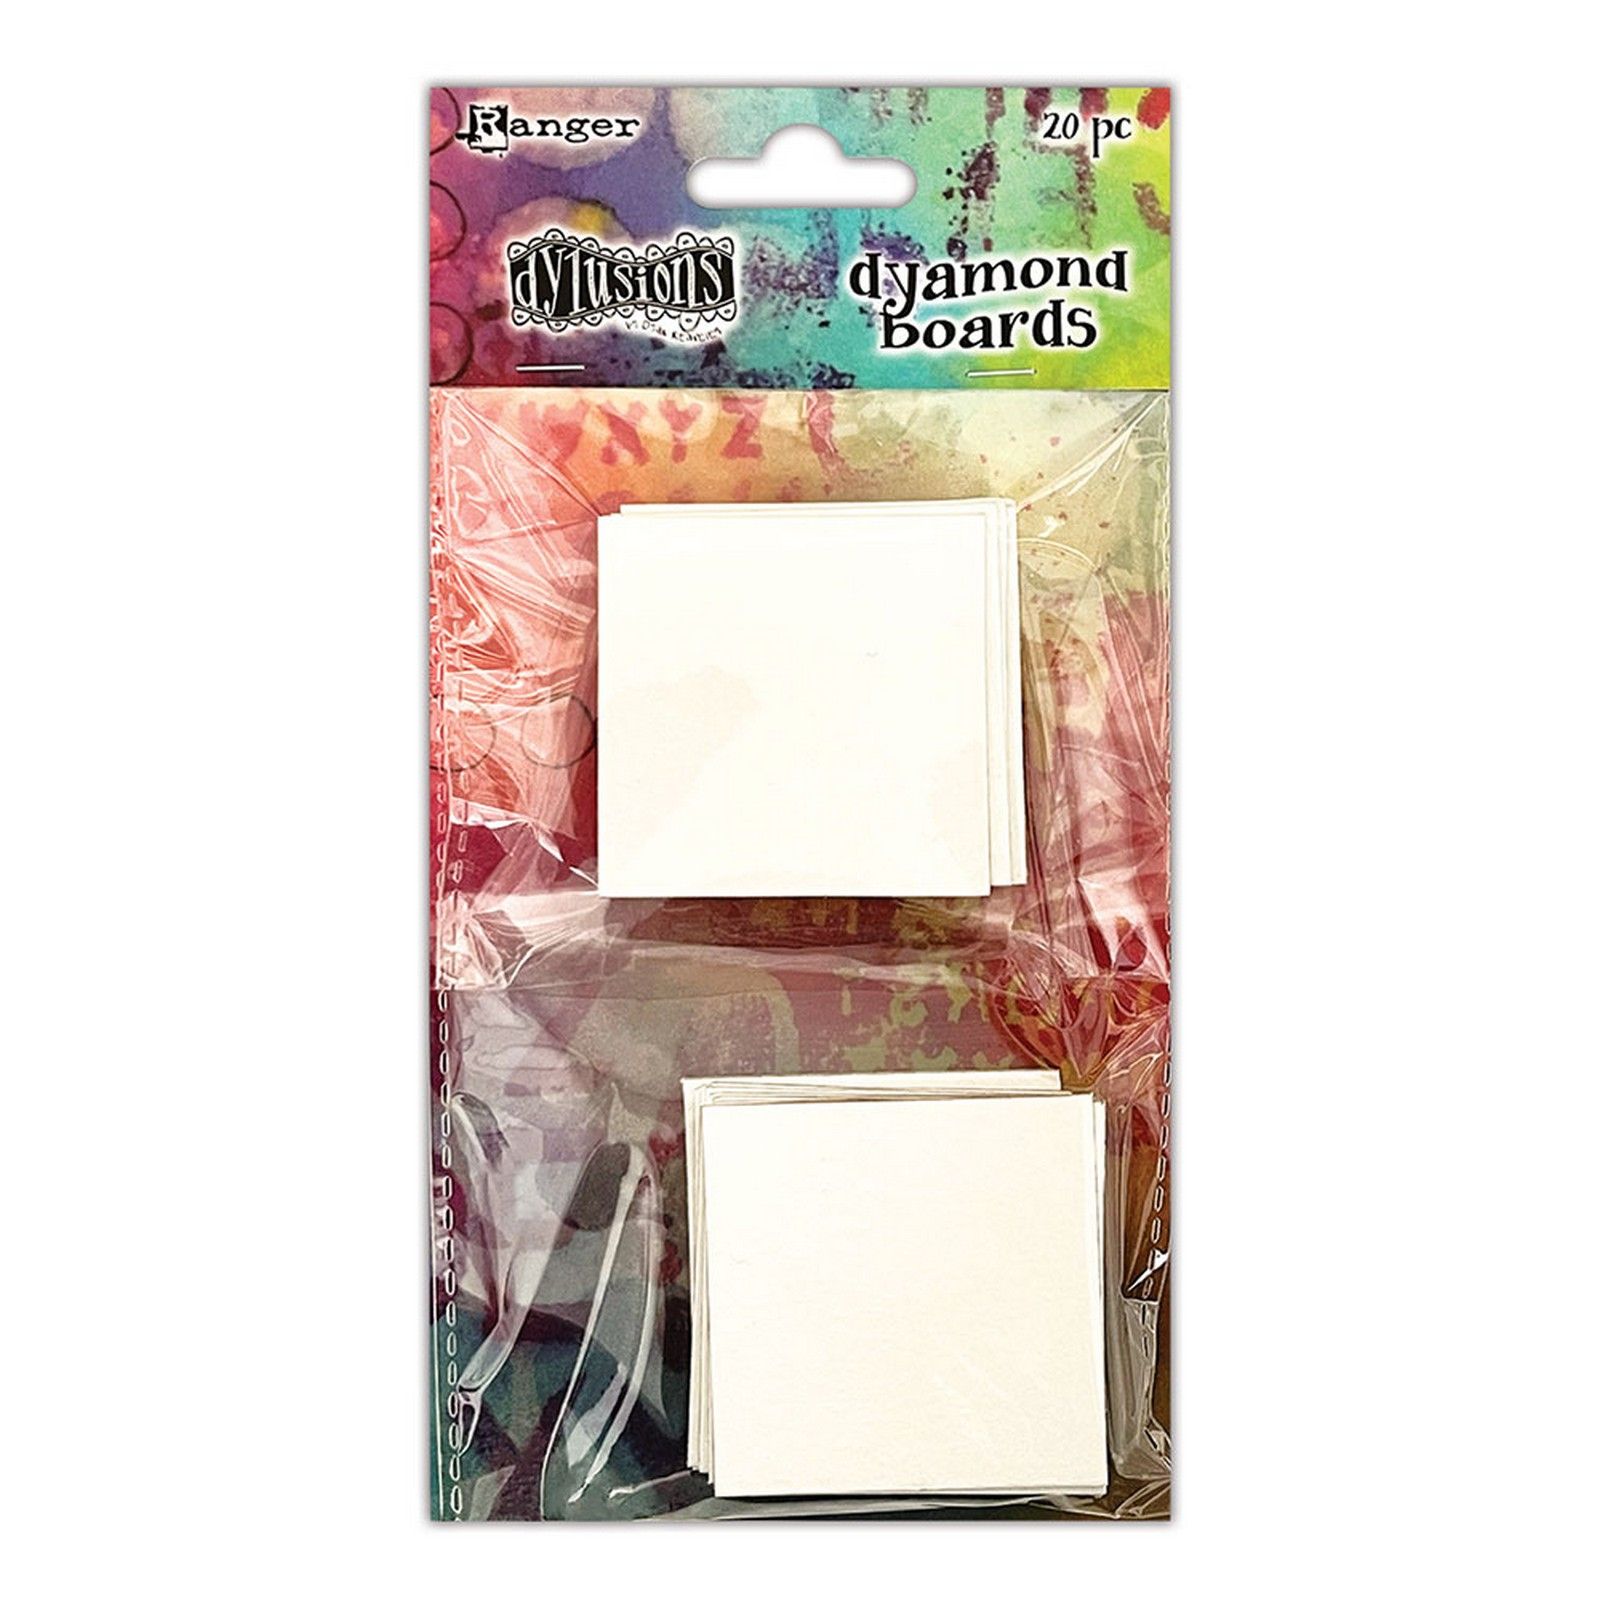 Ranger • Dylusions Dyamond Boards Squares